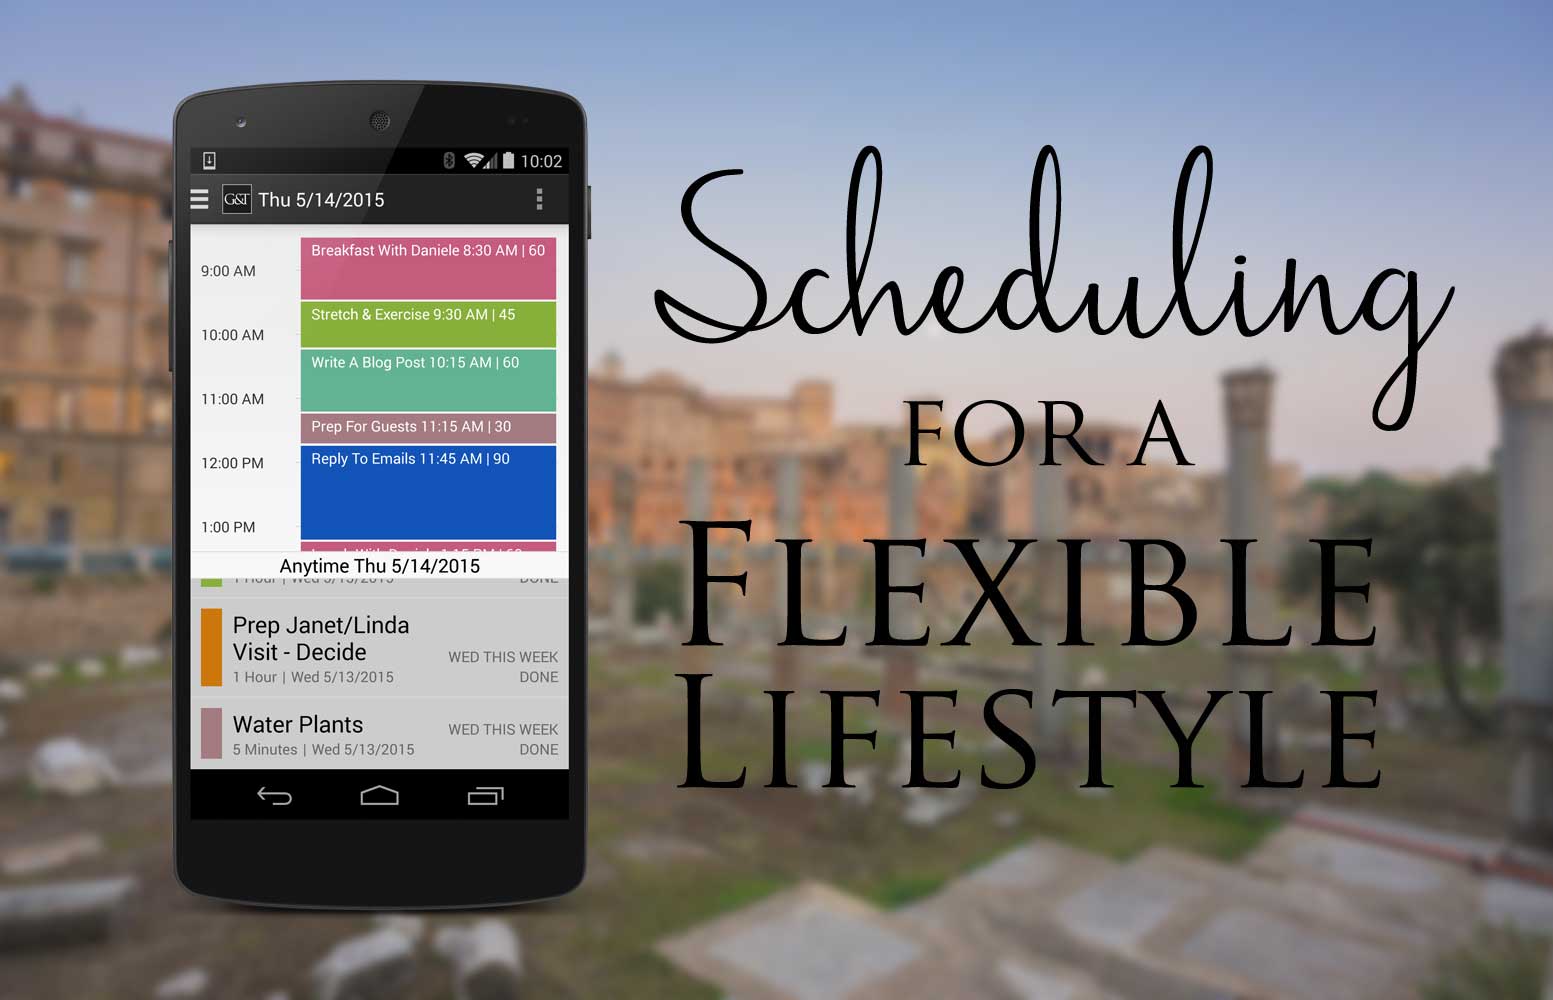 Simply Goals & Tasks | Scheduling for a Flexible Lifestyle